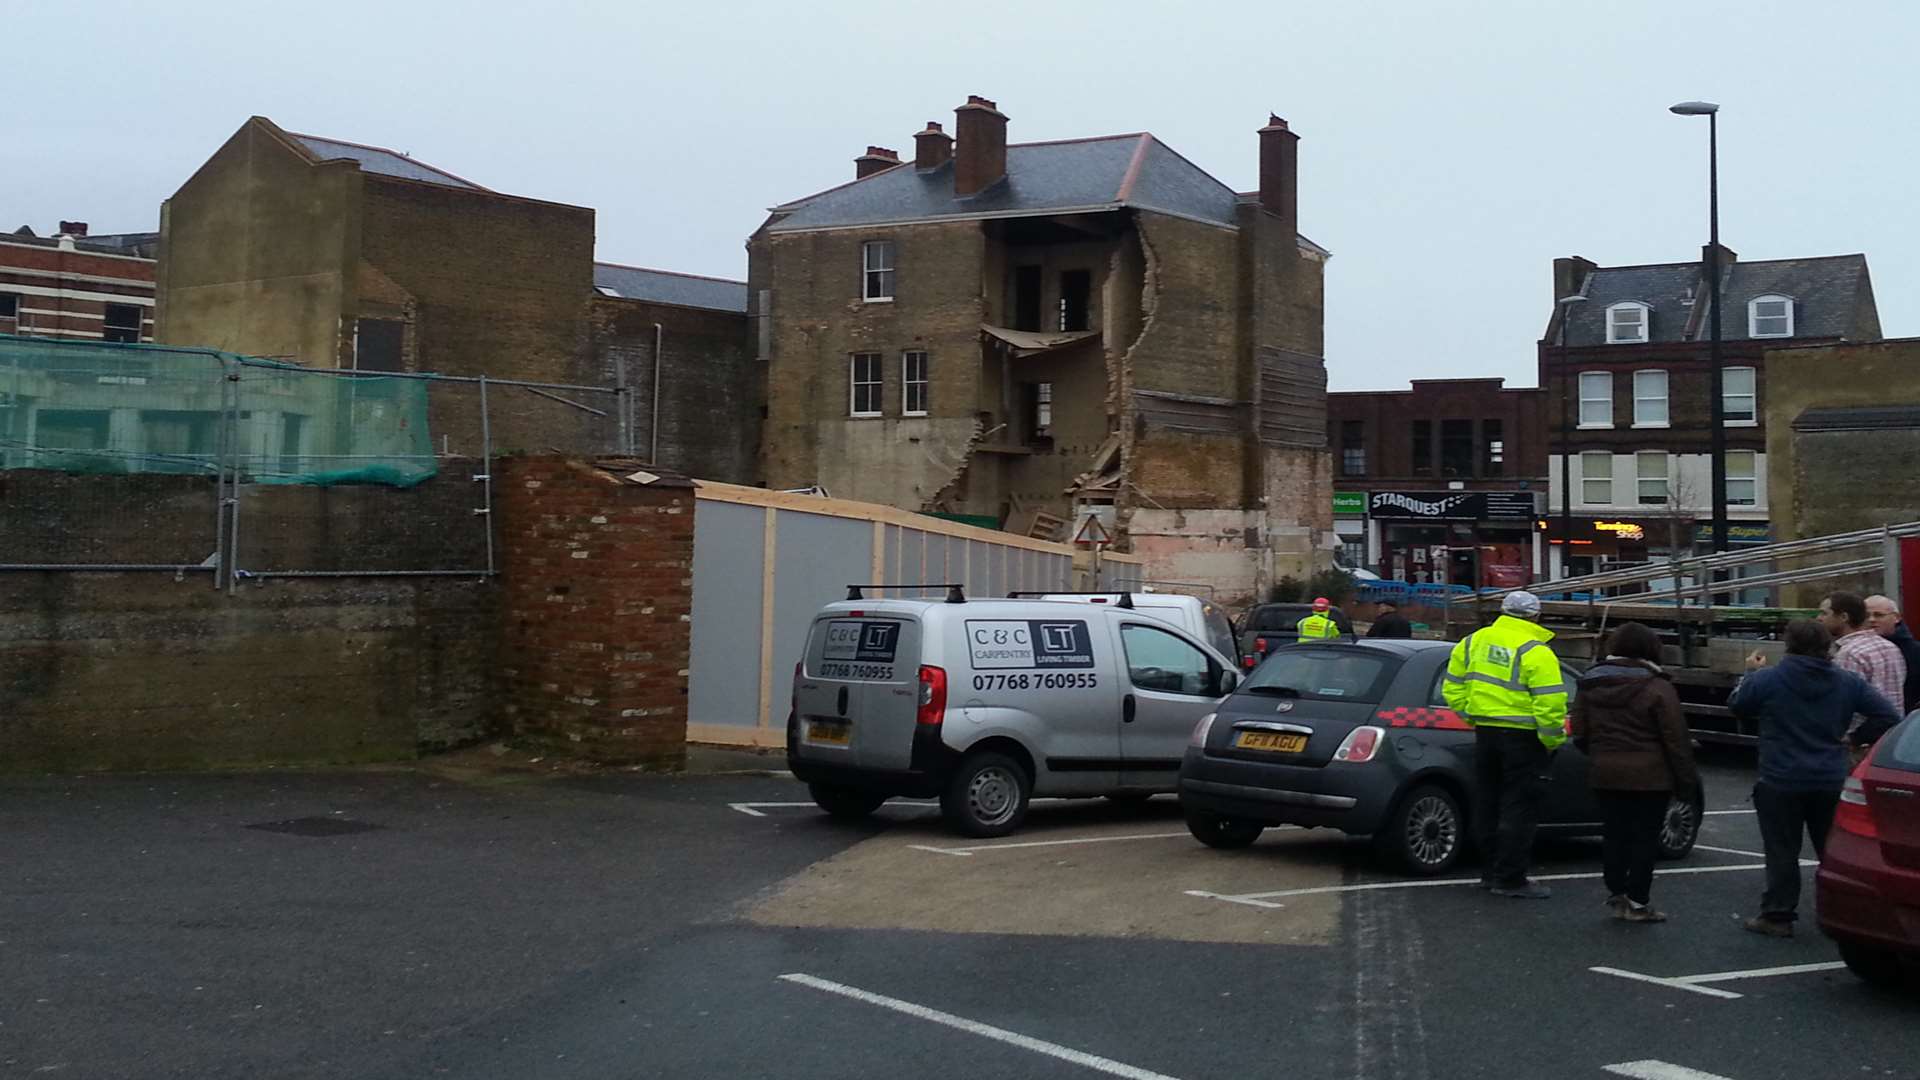 Passers-by look on at the scene of the collapse in Chatham